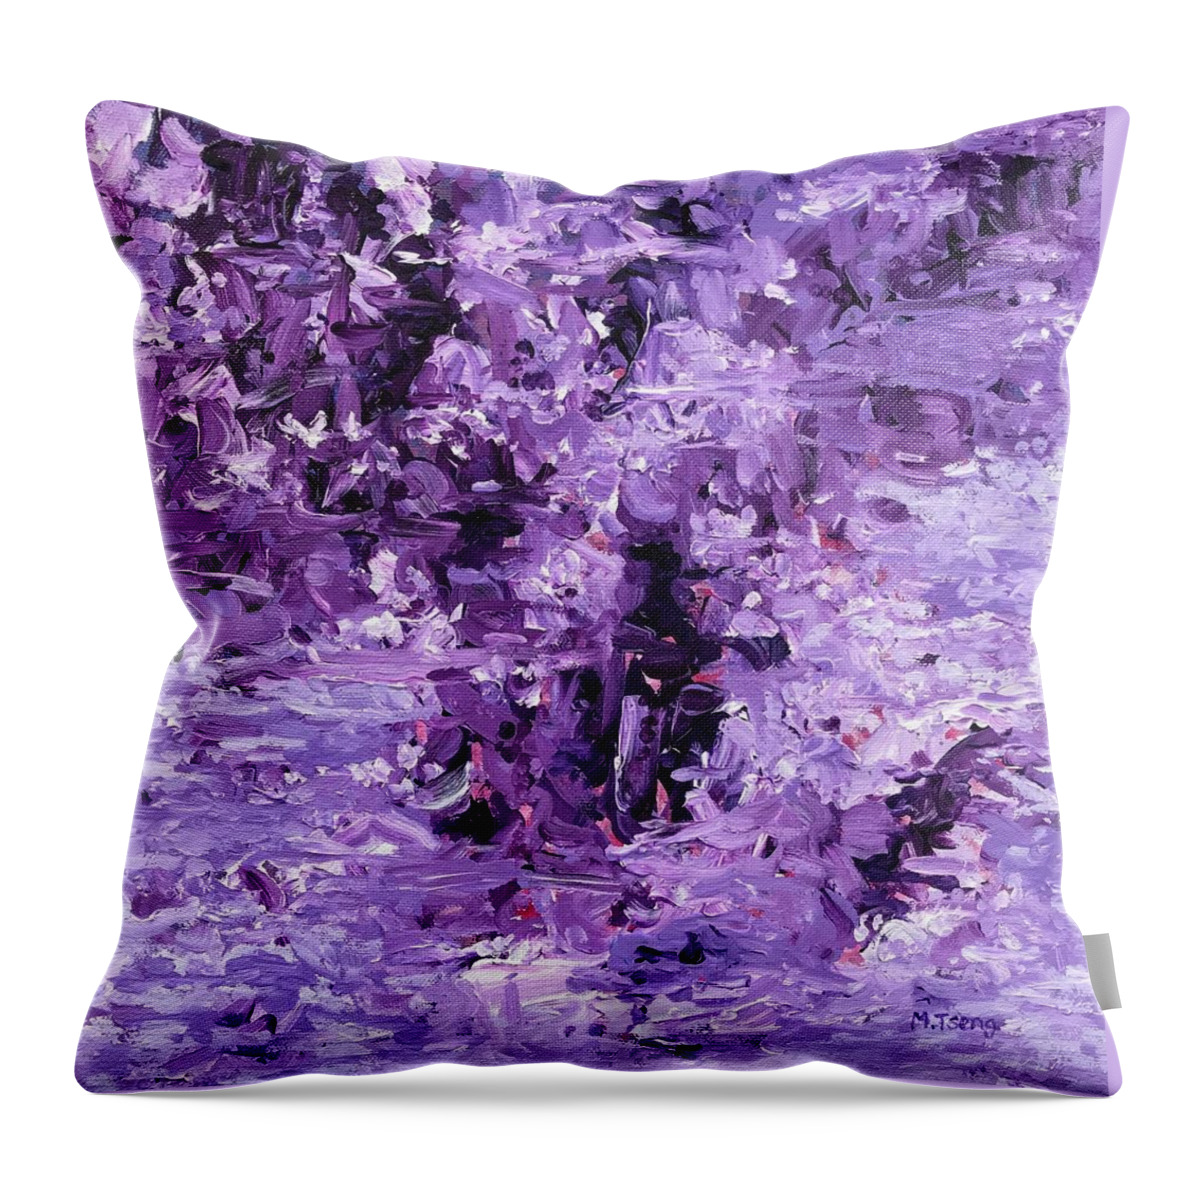 Mirage Throw Pillow featuring the painting Mirage #7 by Milly Tseng